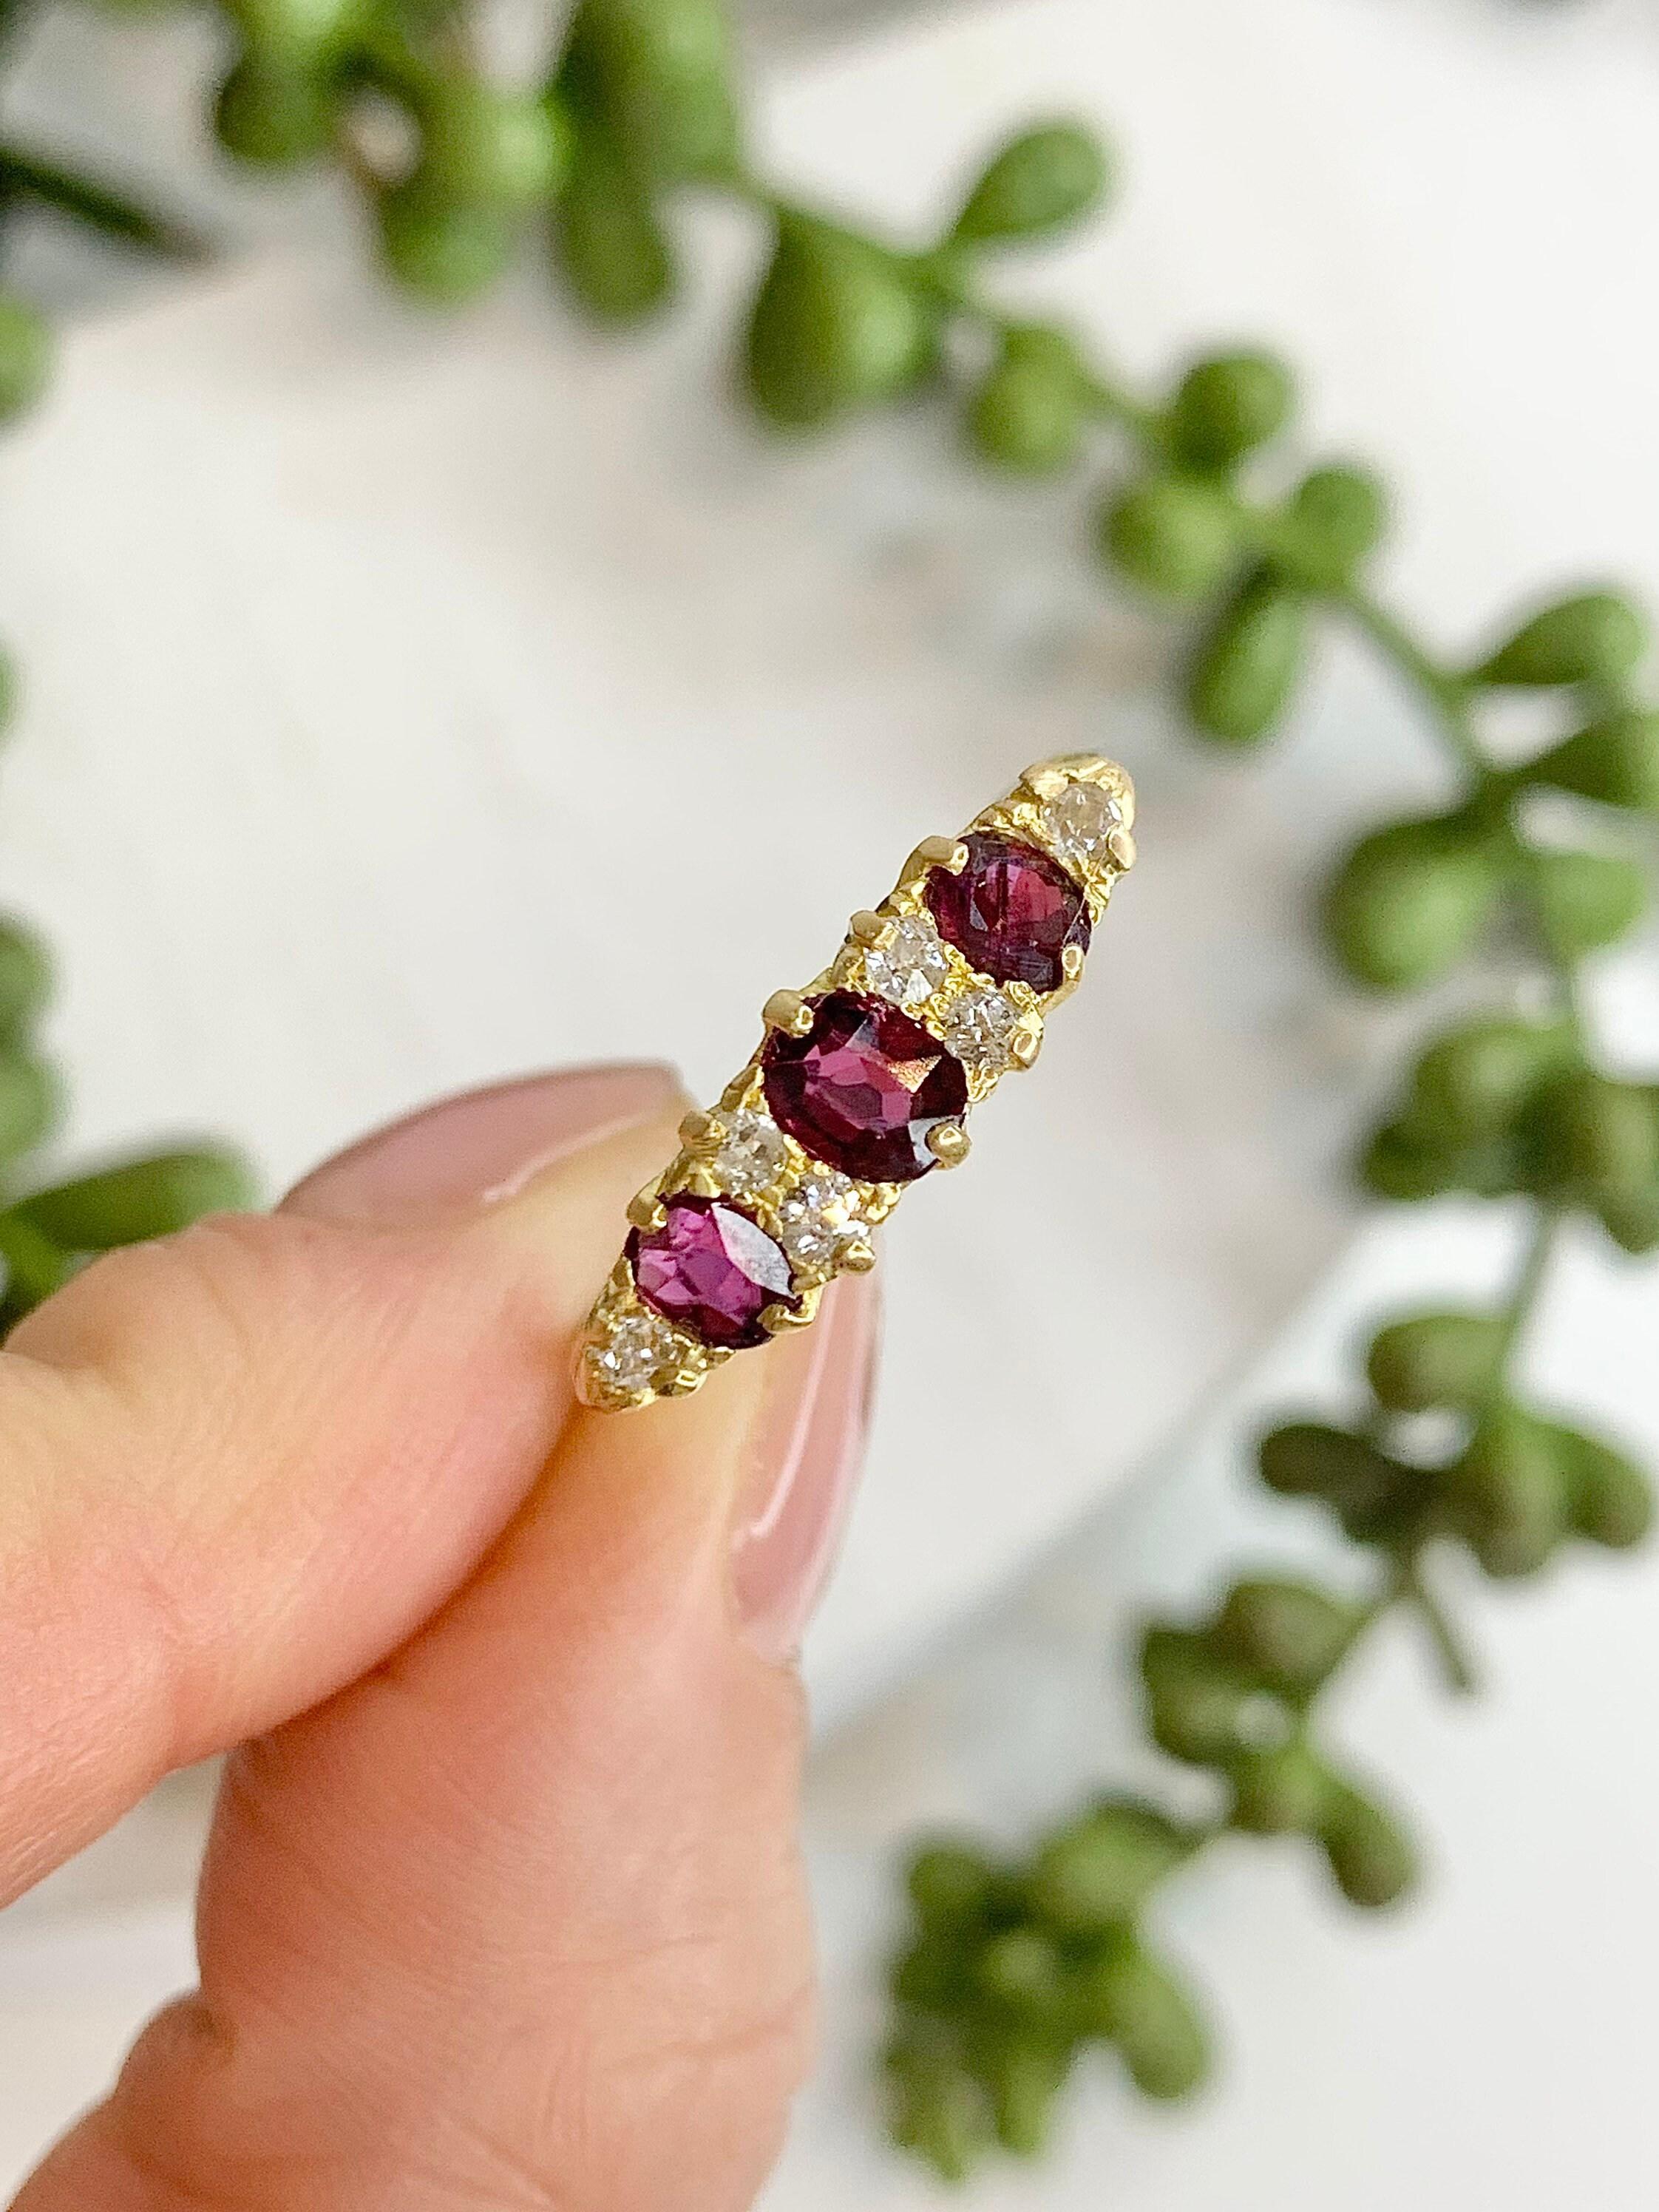 Antique Ruby & Diamond Carved Ring 

18ct Gold  Stamped 

Victorian Circa 1880 

Fabulous Victorian Hand Carved Ring with Scroll Detailing Set with 3 Gorgeous Rubies & Brilliant Cut Diamonds 

UK Size Q

US Size 8 1/4 

Can be resized using our